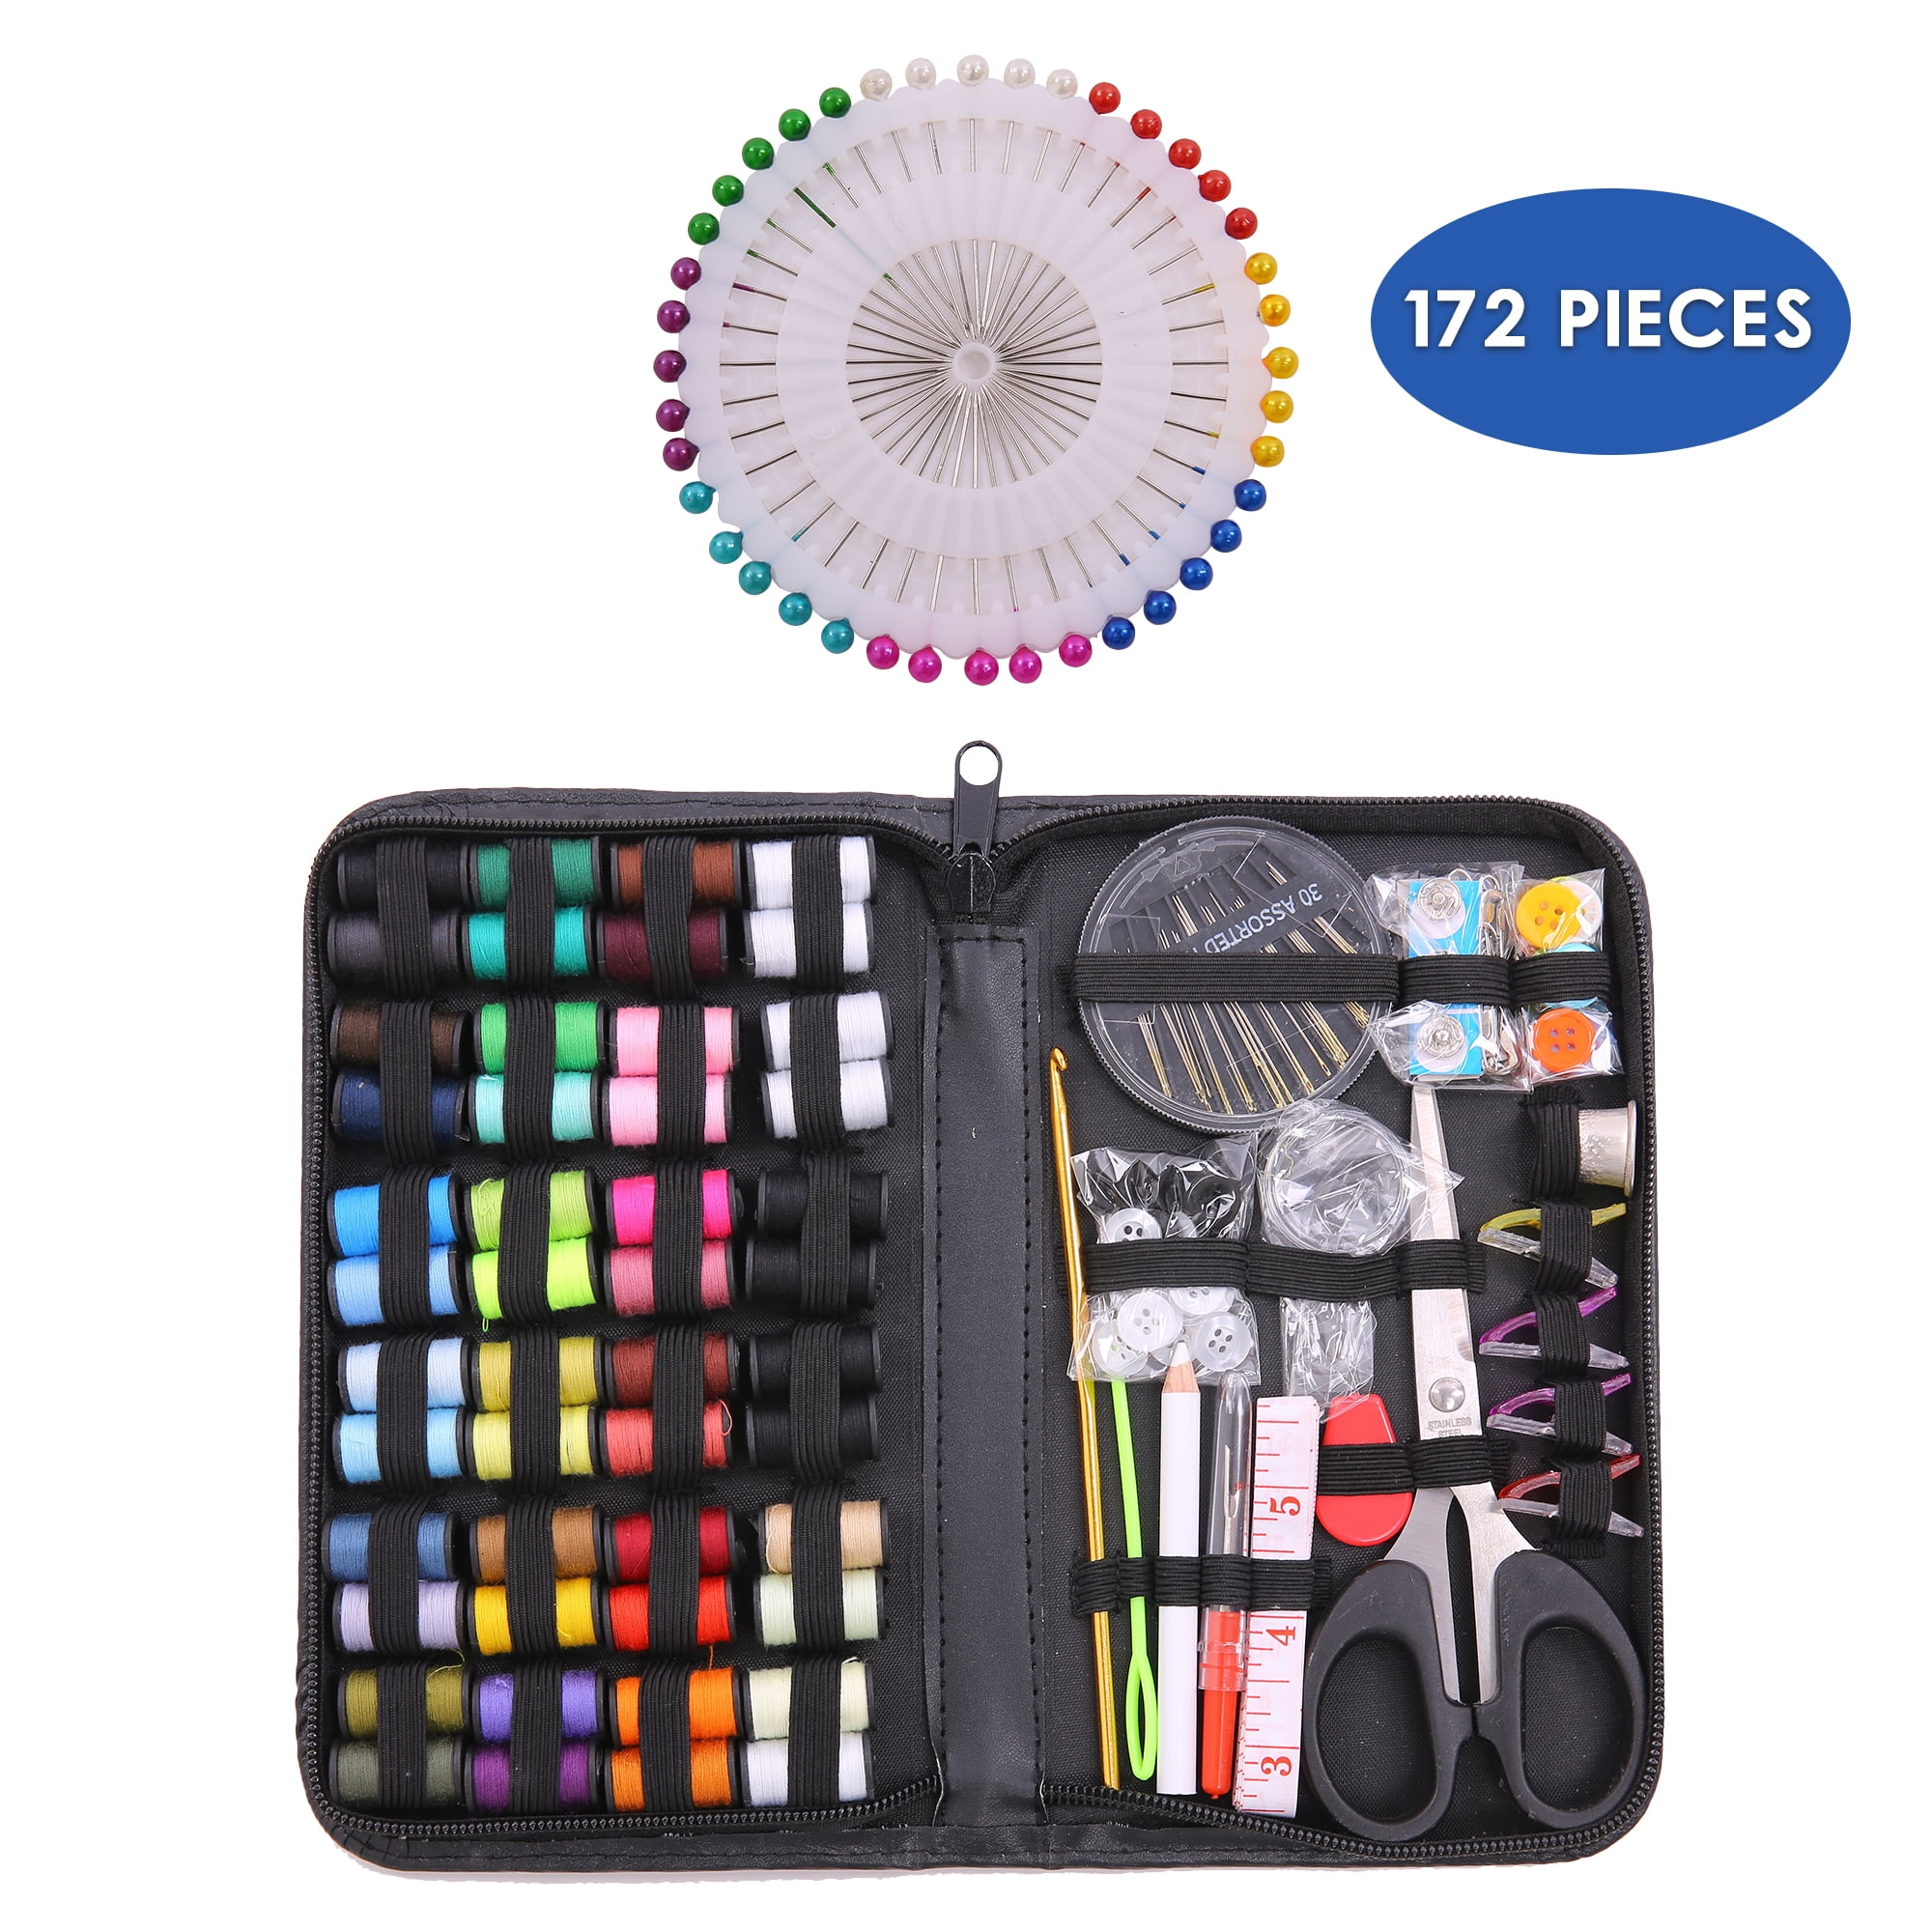 ProCase Practical Sewing Kit for Home Travel Emergency, 183 pcs Sewing  Supplies and DIY Accessories for Adults Kids Beginners, All in One Portable